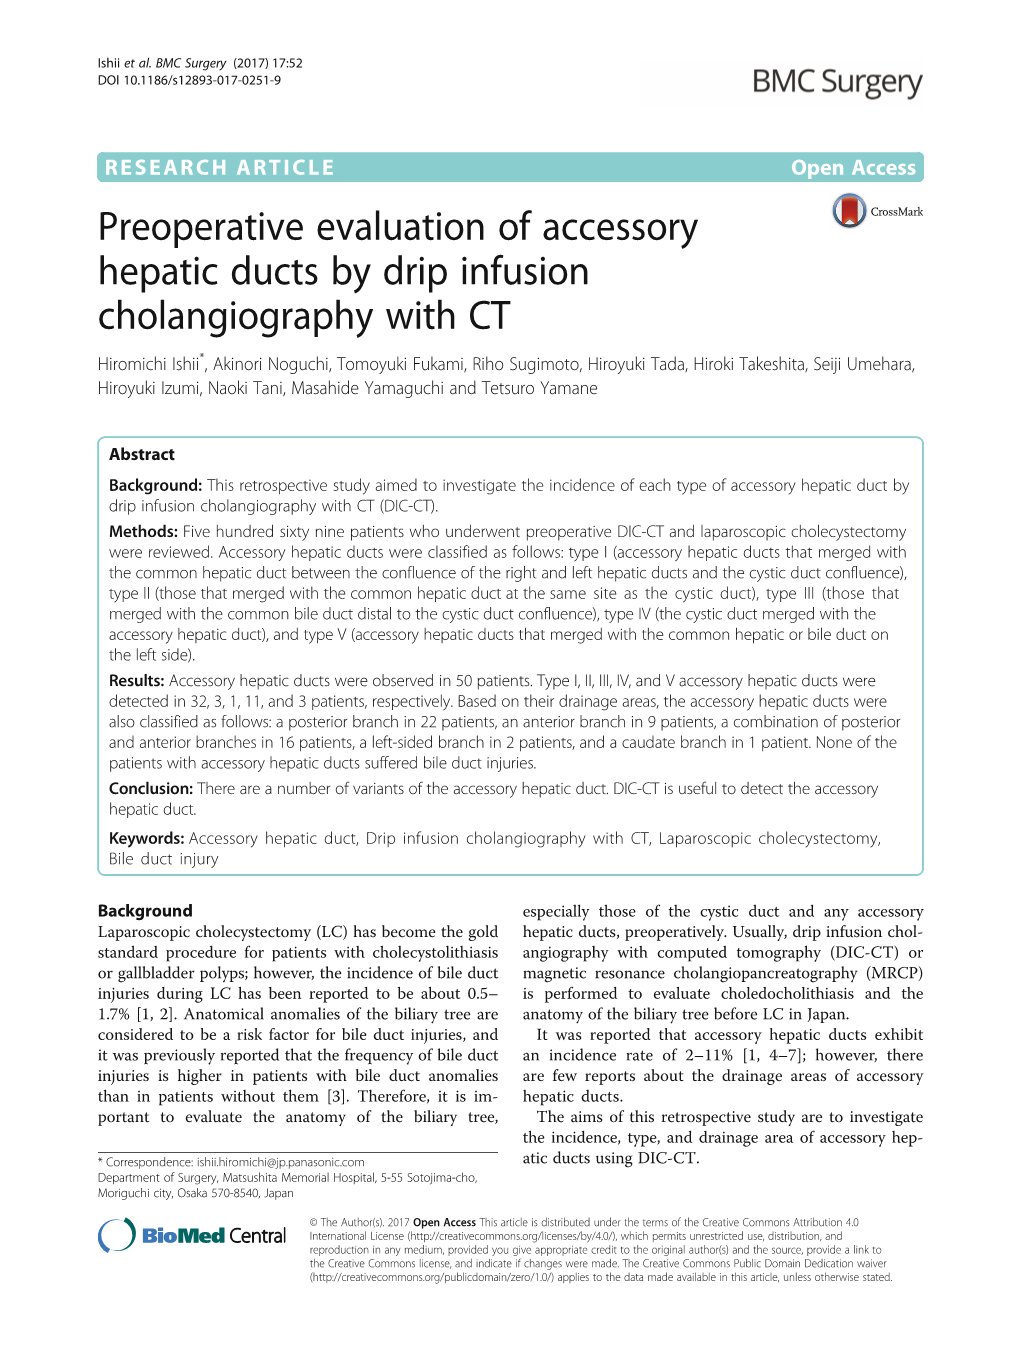 Preoperative Evaluation of Accessory Hepatic Ducts by Drip Infusion Cholangiography with CT